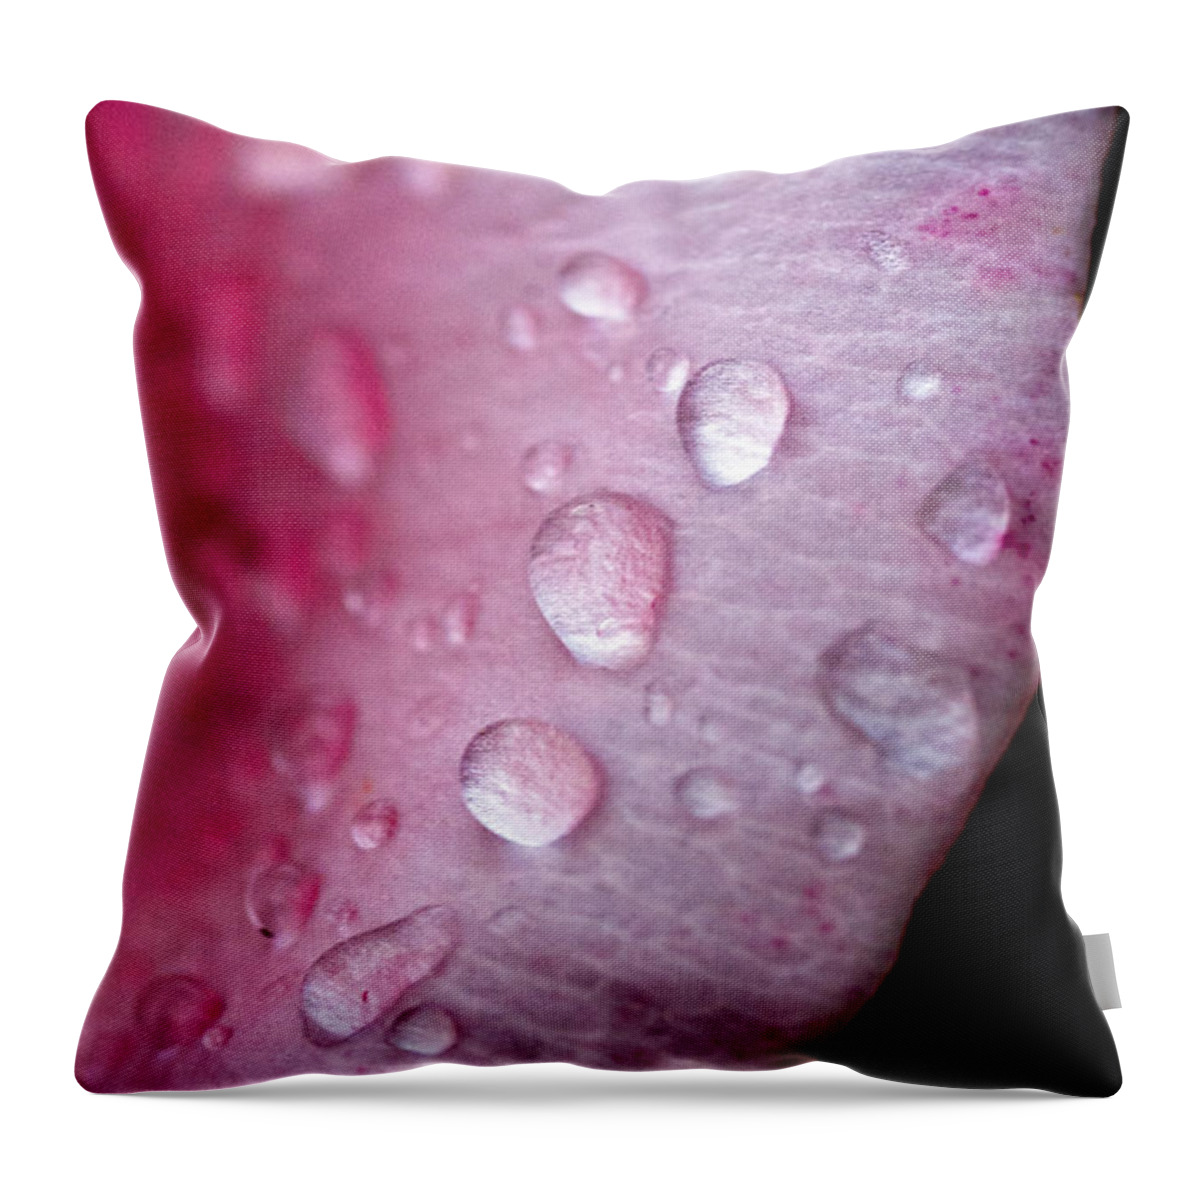 Petal Throw Pillow featuring the photograph Droplets On Pink #1 by Christopher Holmes